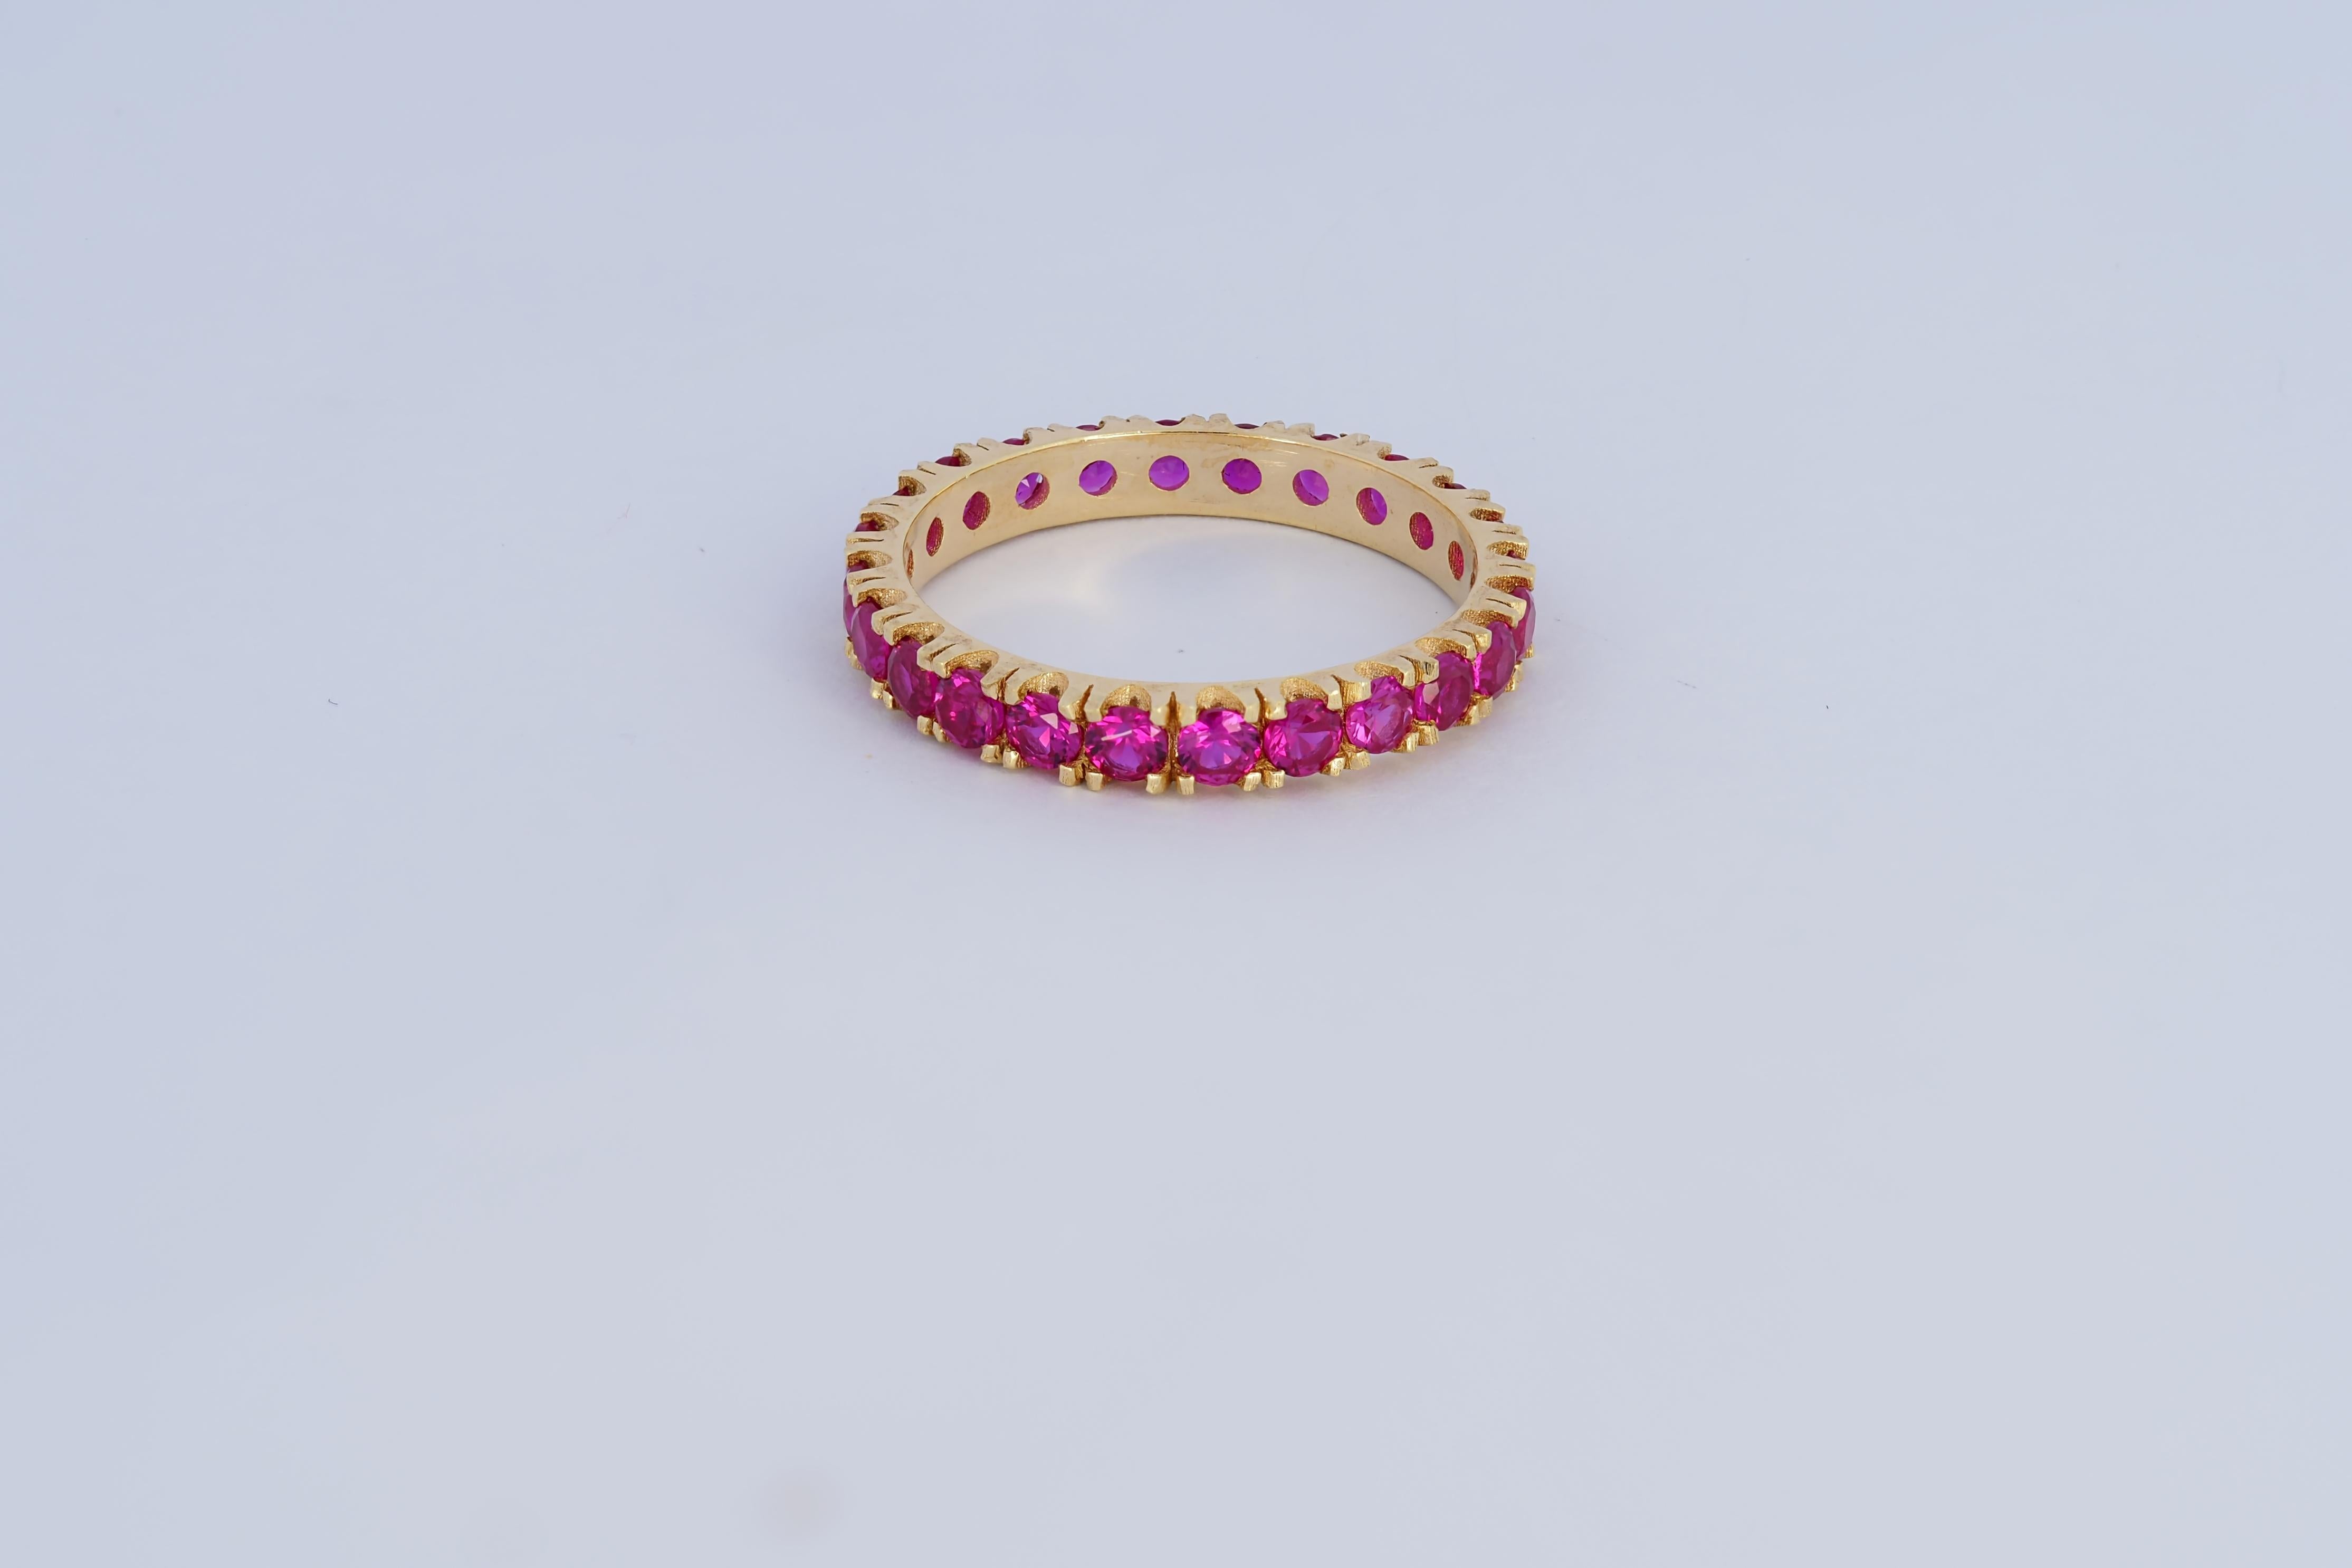 For Sale:  Pinkish red gemstone 14k gold eternity ring band. 7